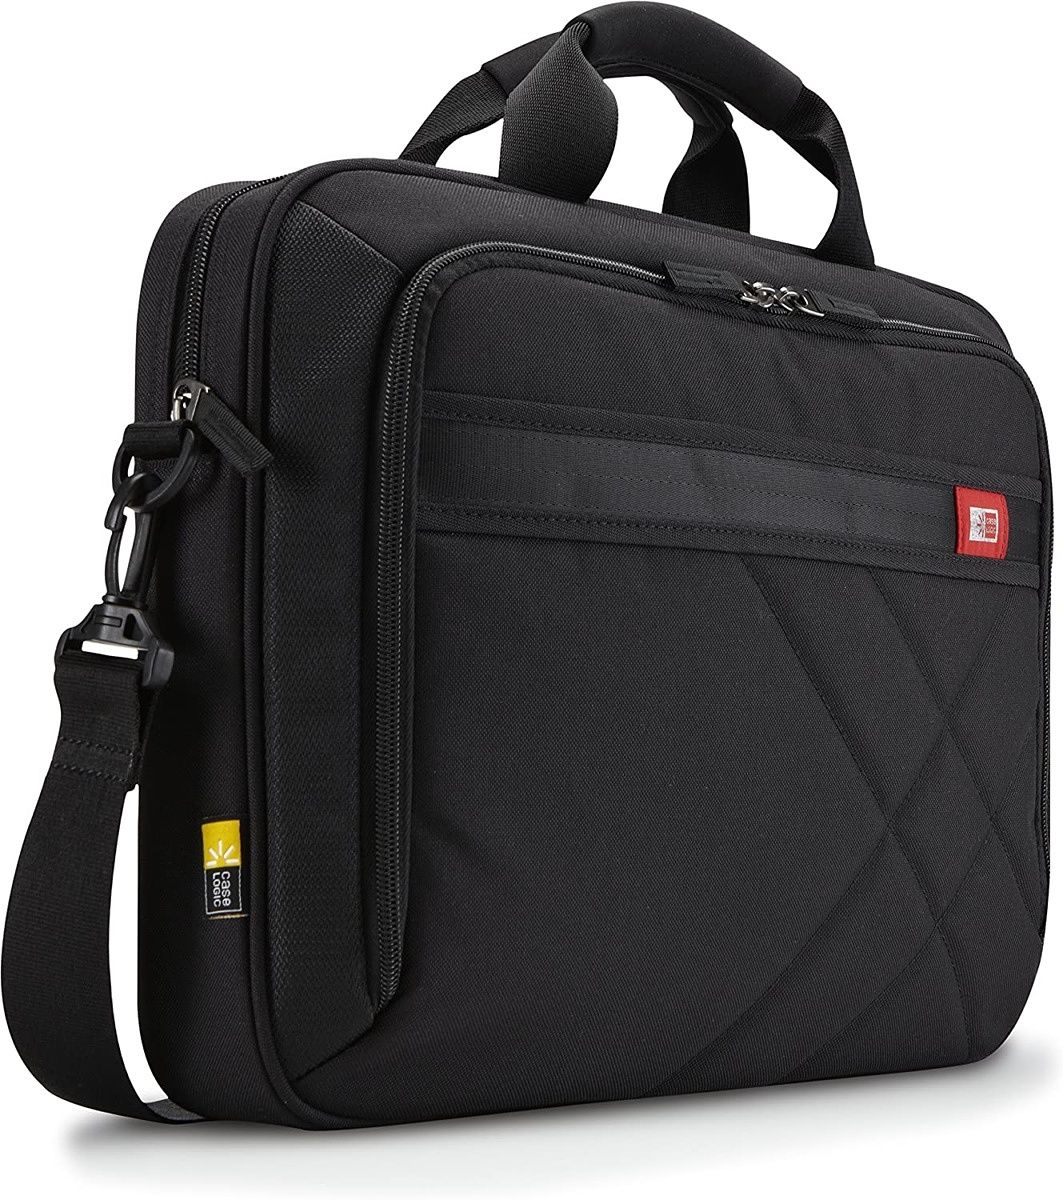 A messenger case for your XPS 17 that offers plenty of space to carry additional accessories including the charger, hard drives, cables, etc. It even has space to fit a 10 inch tablet alongside the laptop.